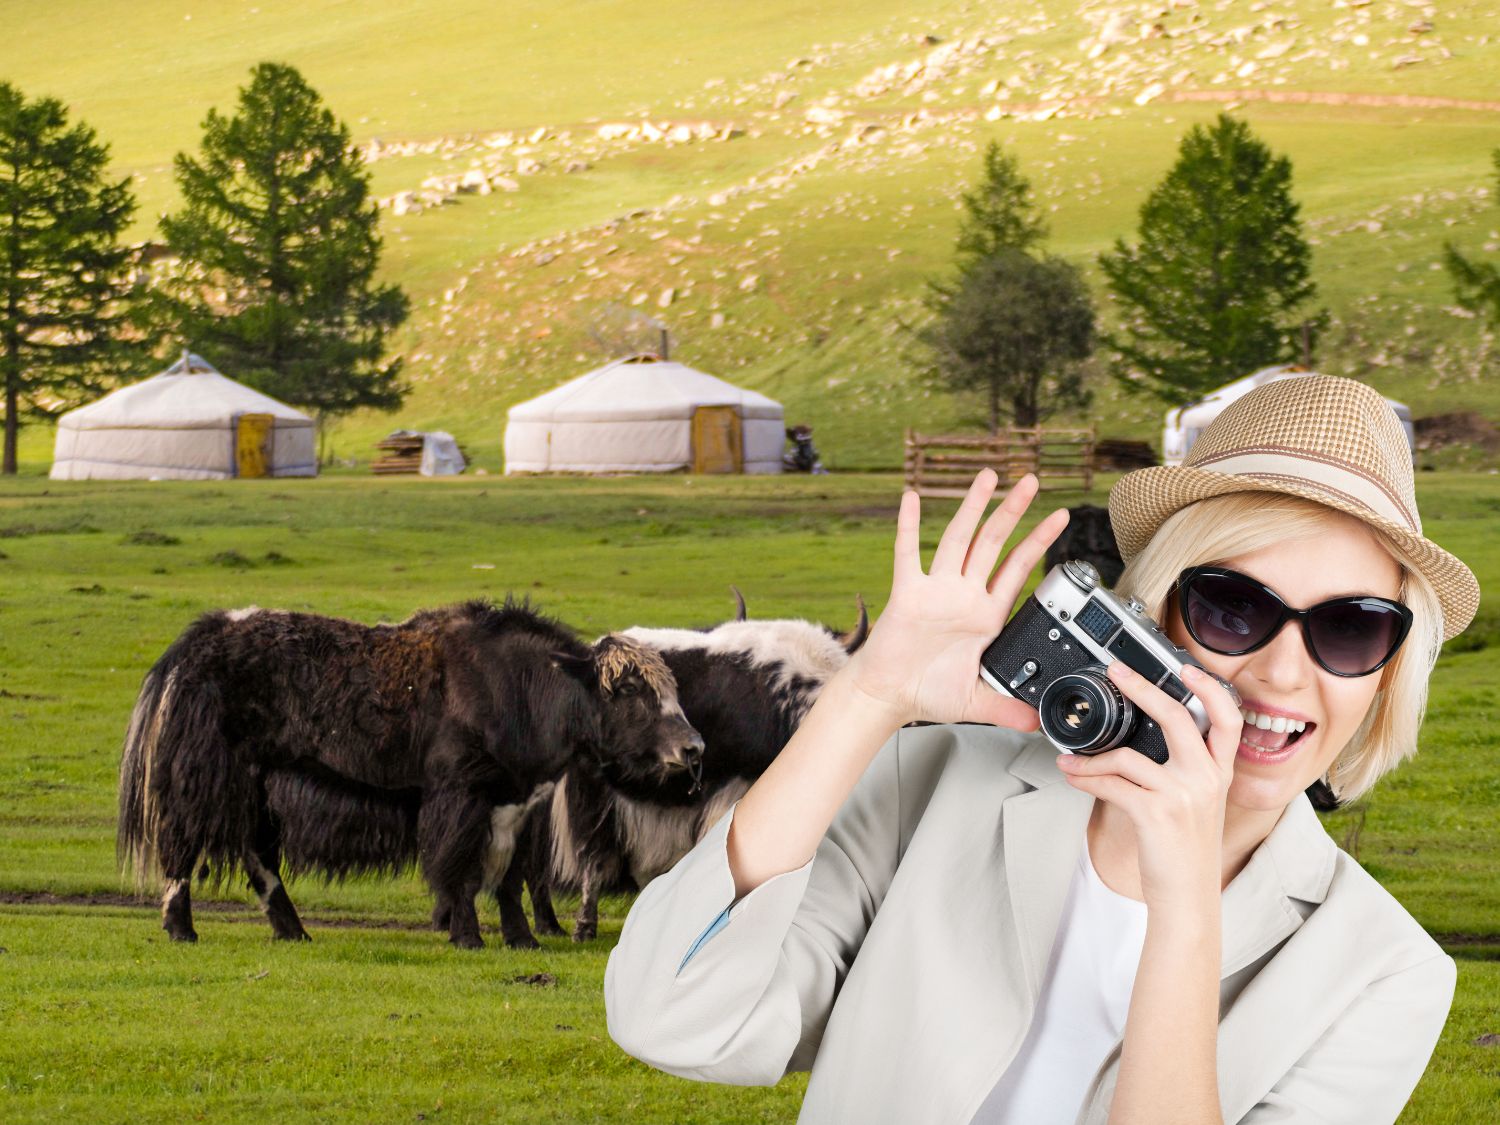 The 6 Best Mongolia Tours For Unforgettable Adventures That Are Achievable & Affordable!